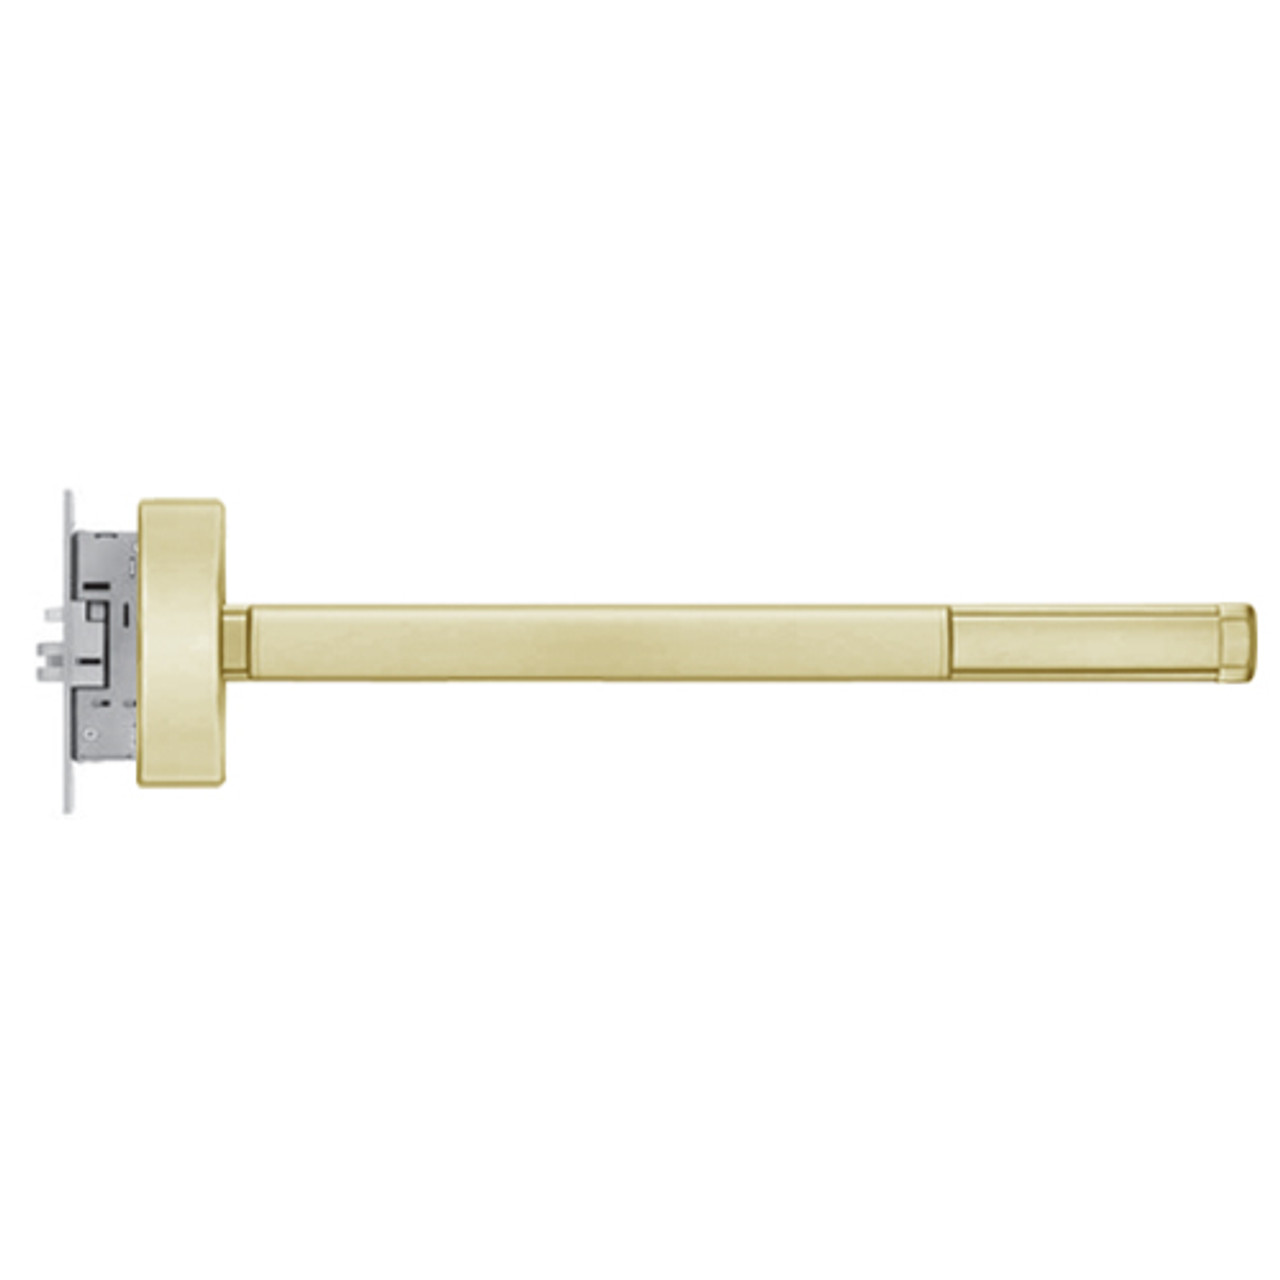 MLR2314-LHR-606-48 PHI 2300 Series Apex Mortise Exit Device with Motorized Latch Retraction Prepped for Lever-Knob Always Active in Satin Brass Finish